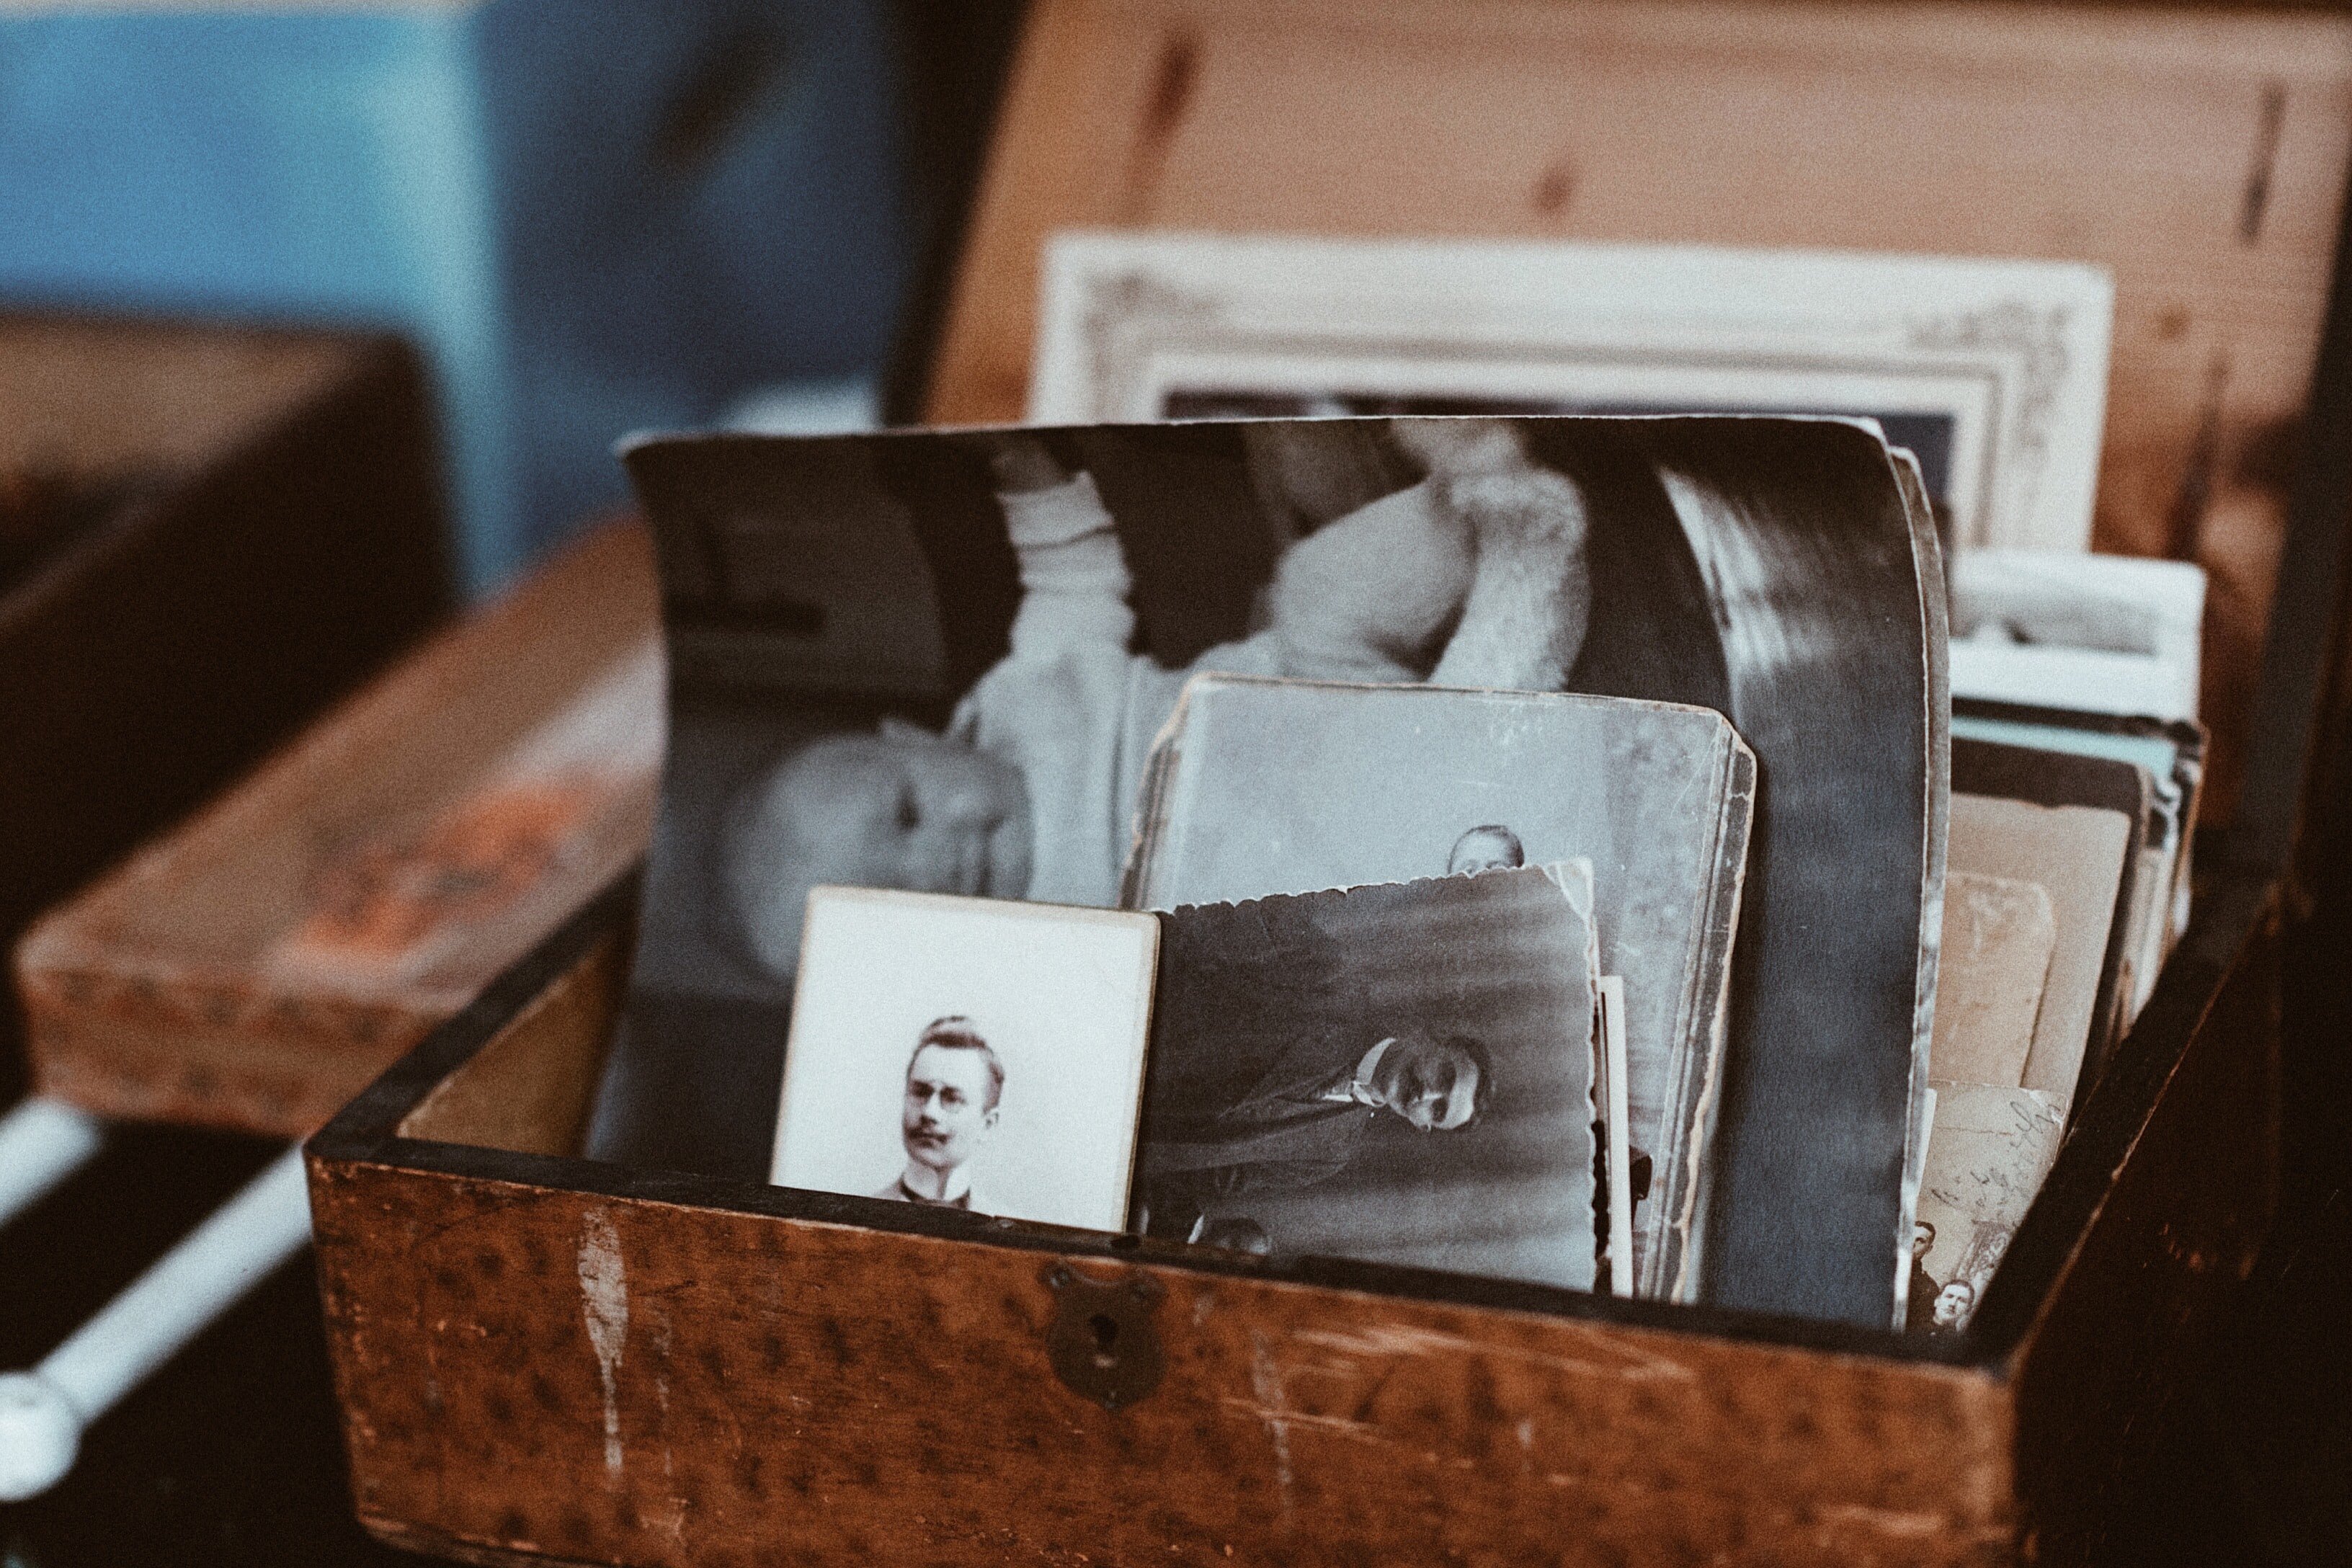 Clara found pictures of a young man in the storeroom | Photo: Pexels